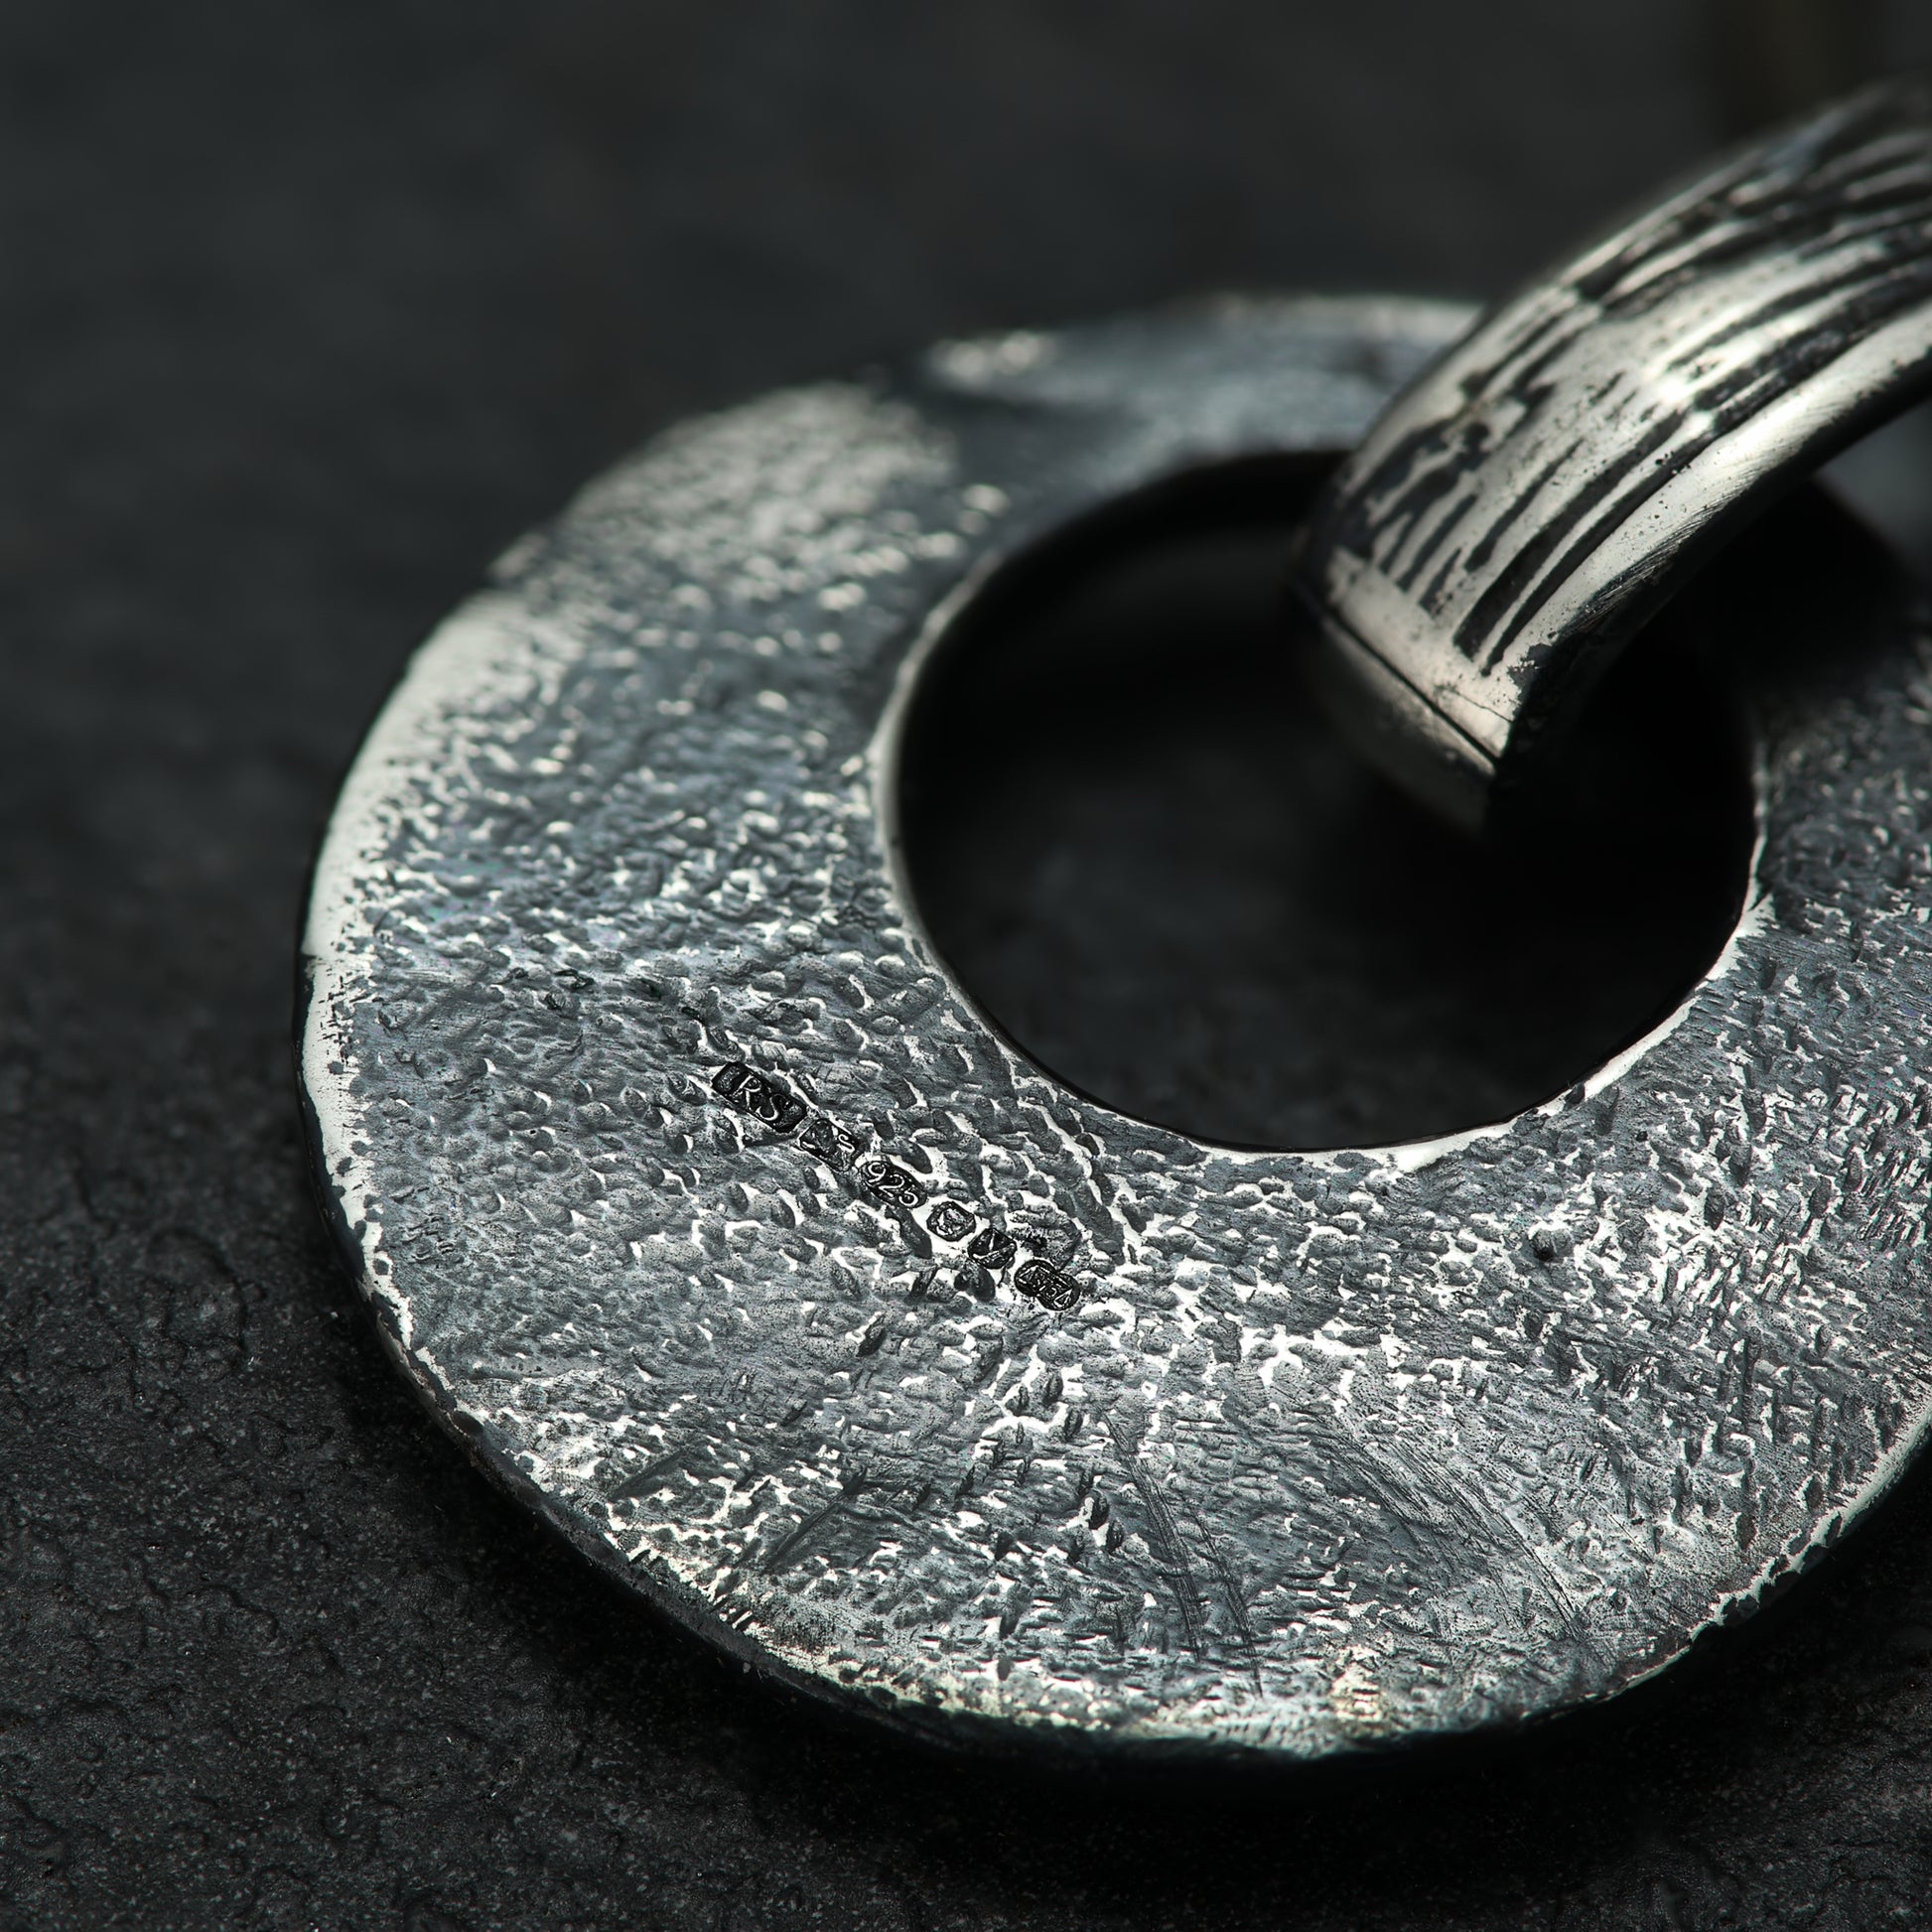 Close-up of a textured silver circular pendant with a hammered finish, highlighting the hallmark and the intricate craftsmanship, against a dark, matte background.